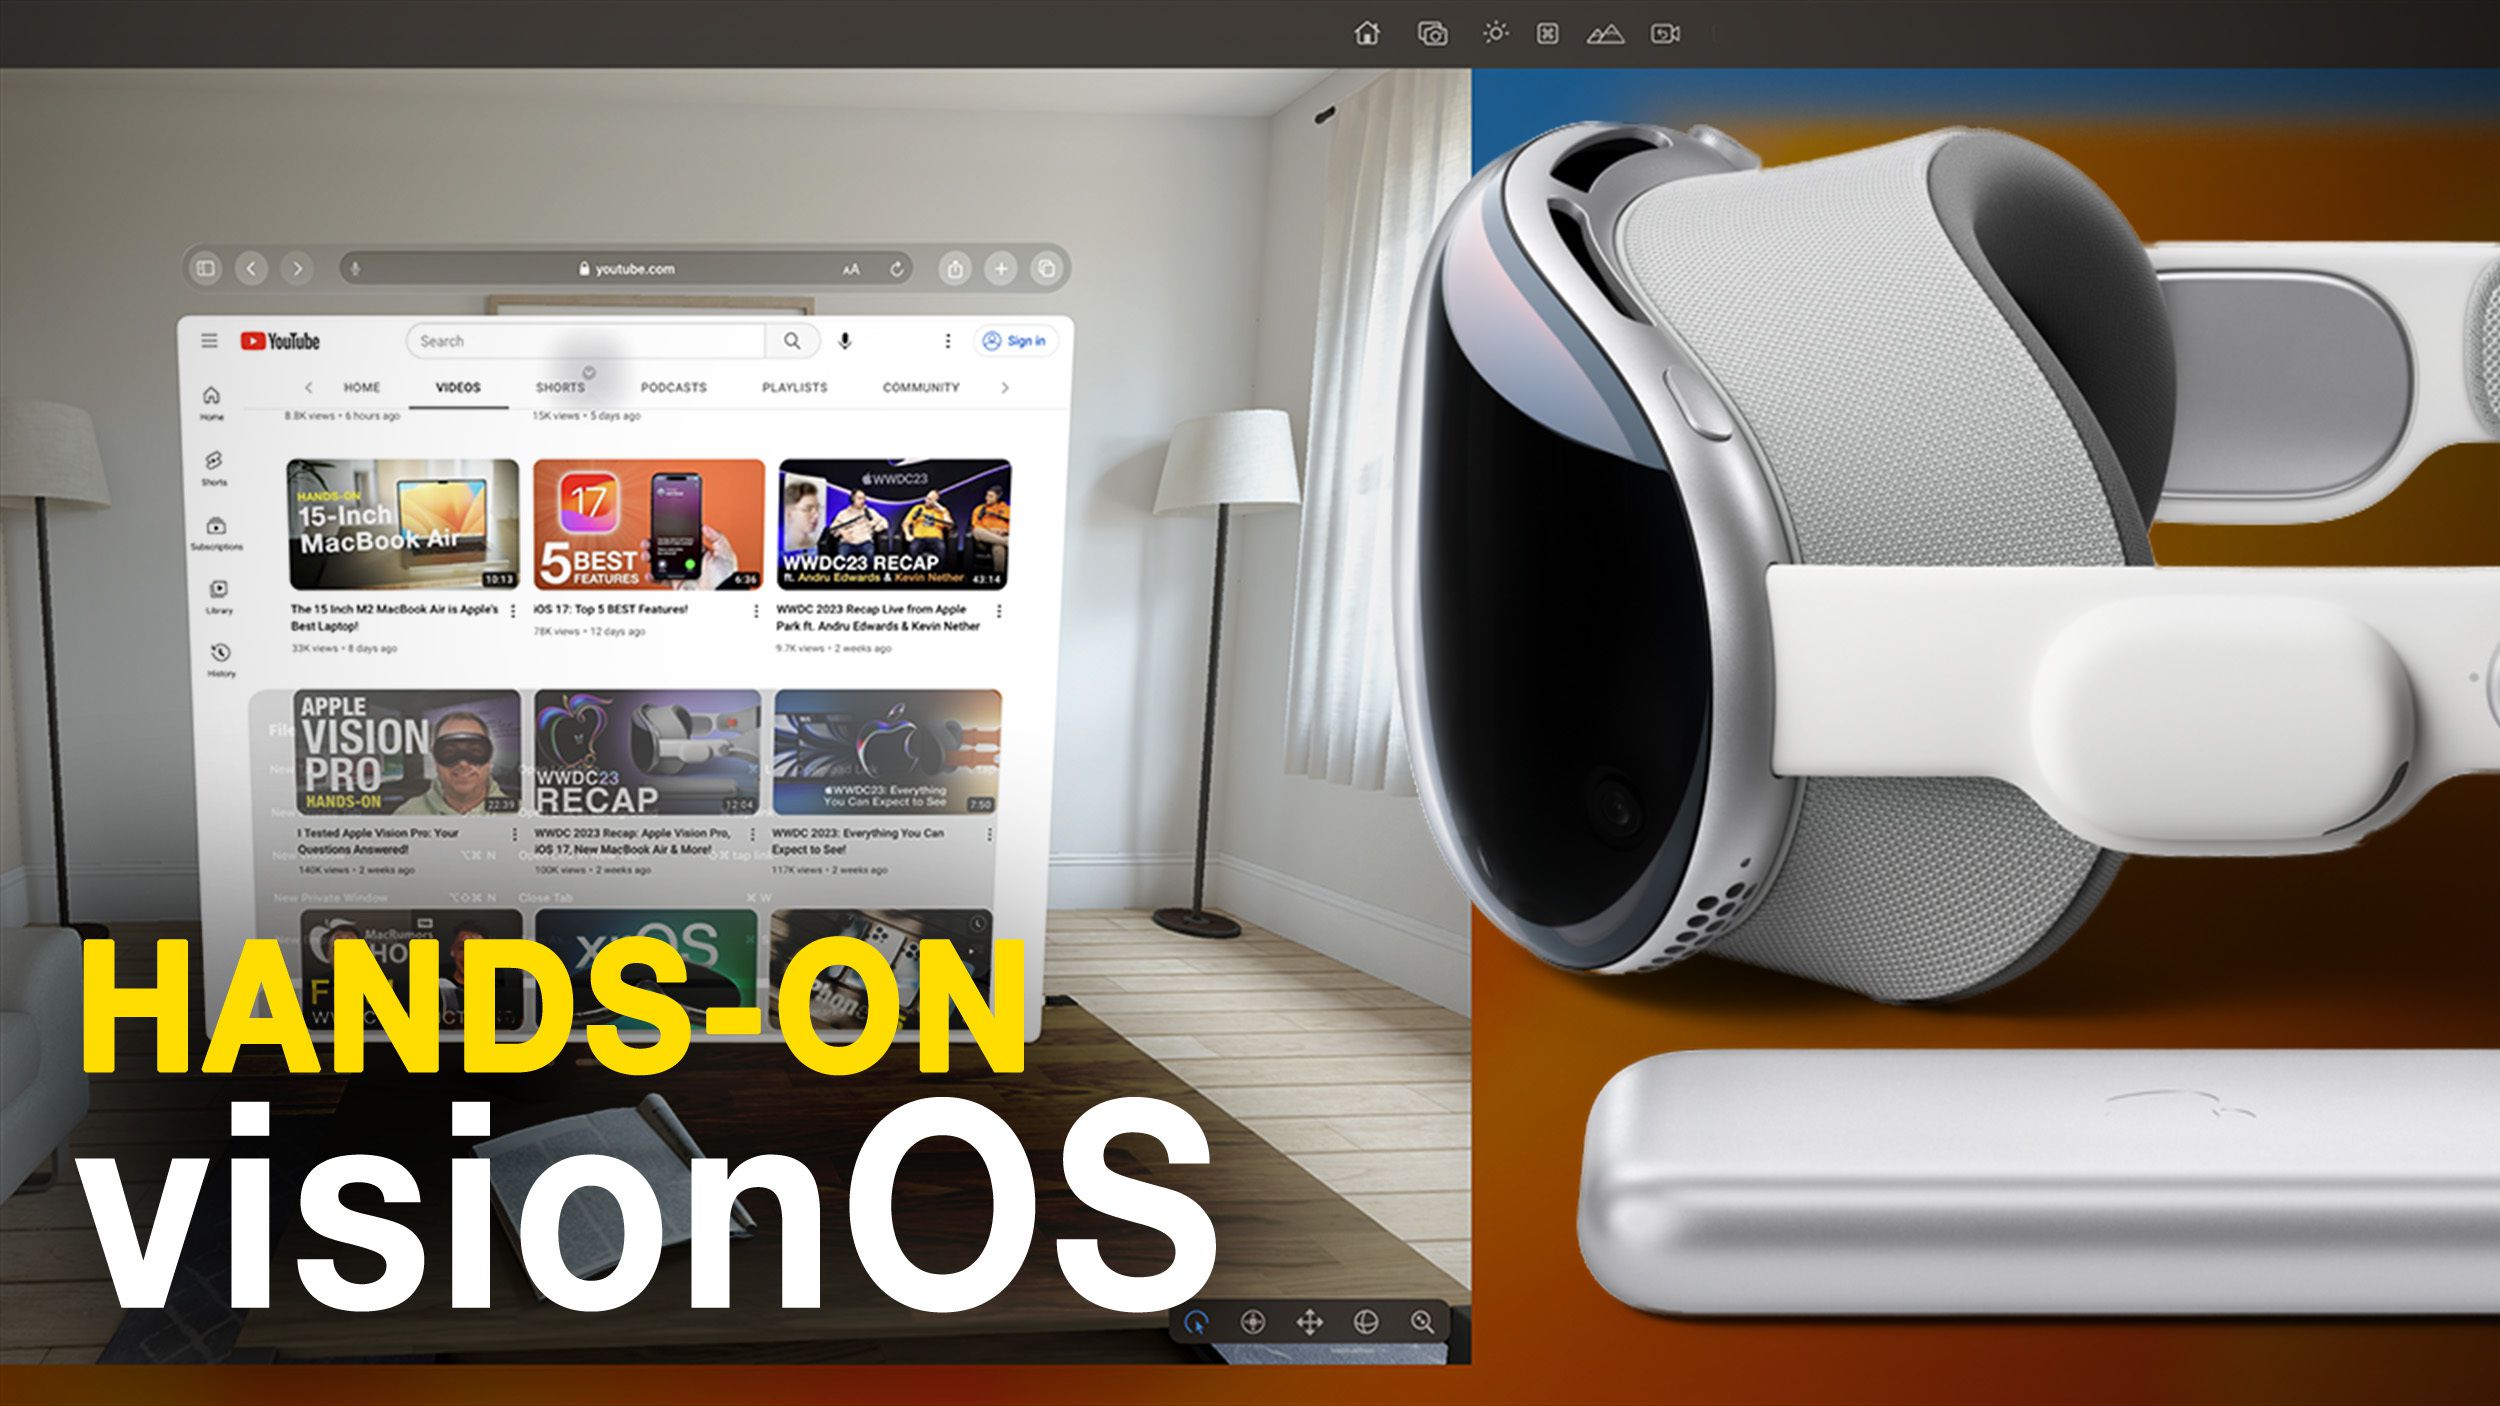 Video: A First Look at visionOS for the Apple Vision Pro